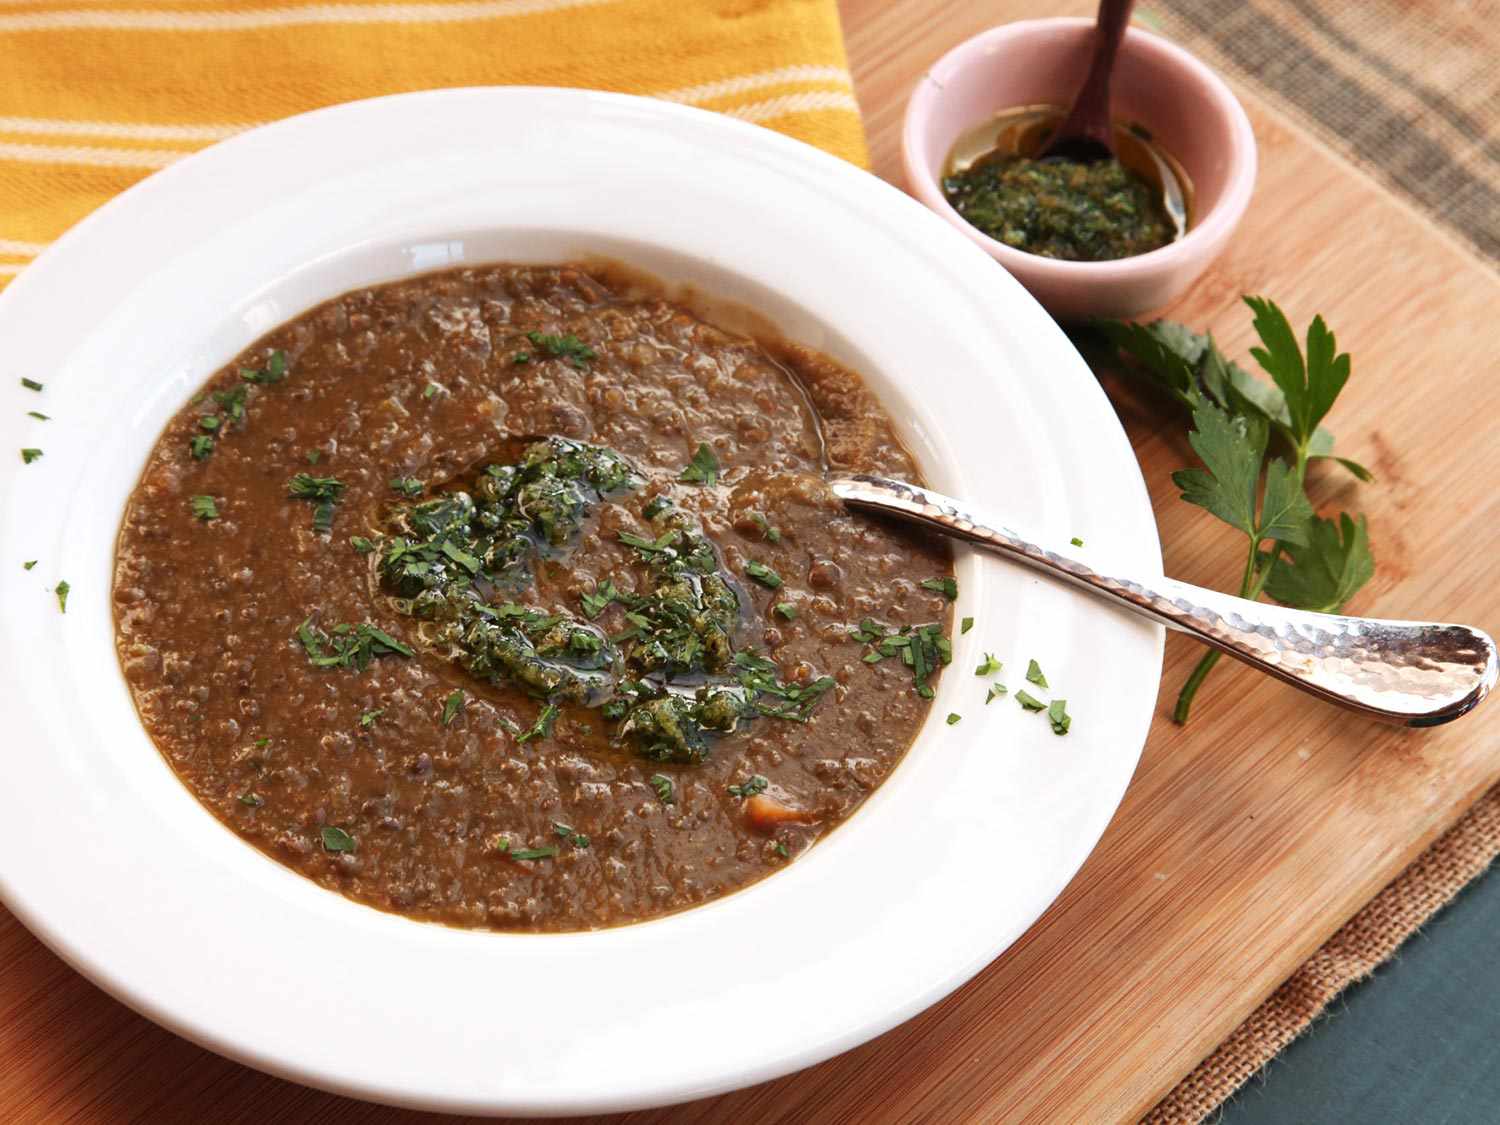 A bowl of lentil soup garnished with chopped herbs and gremolata